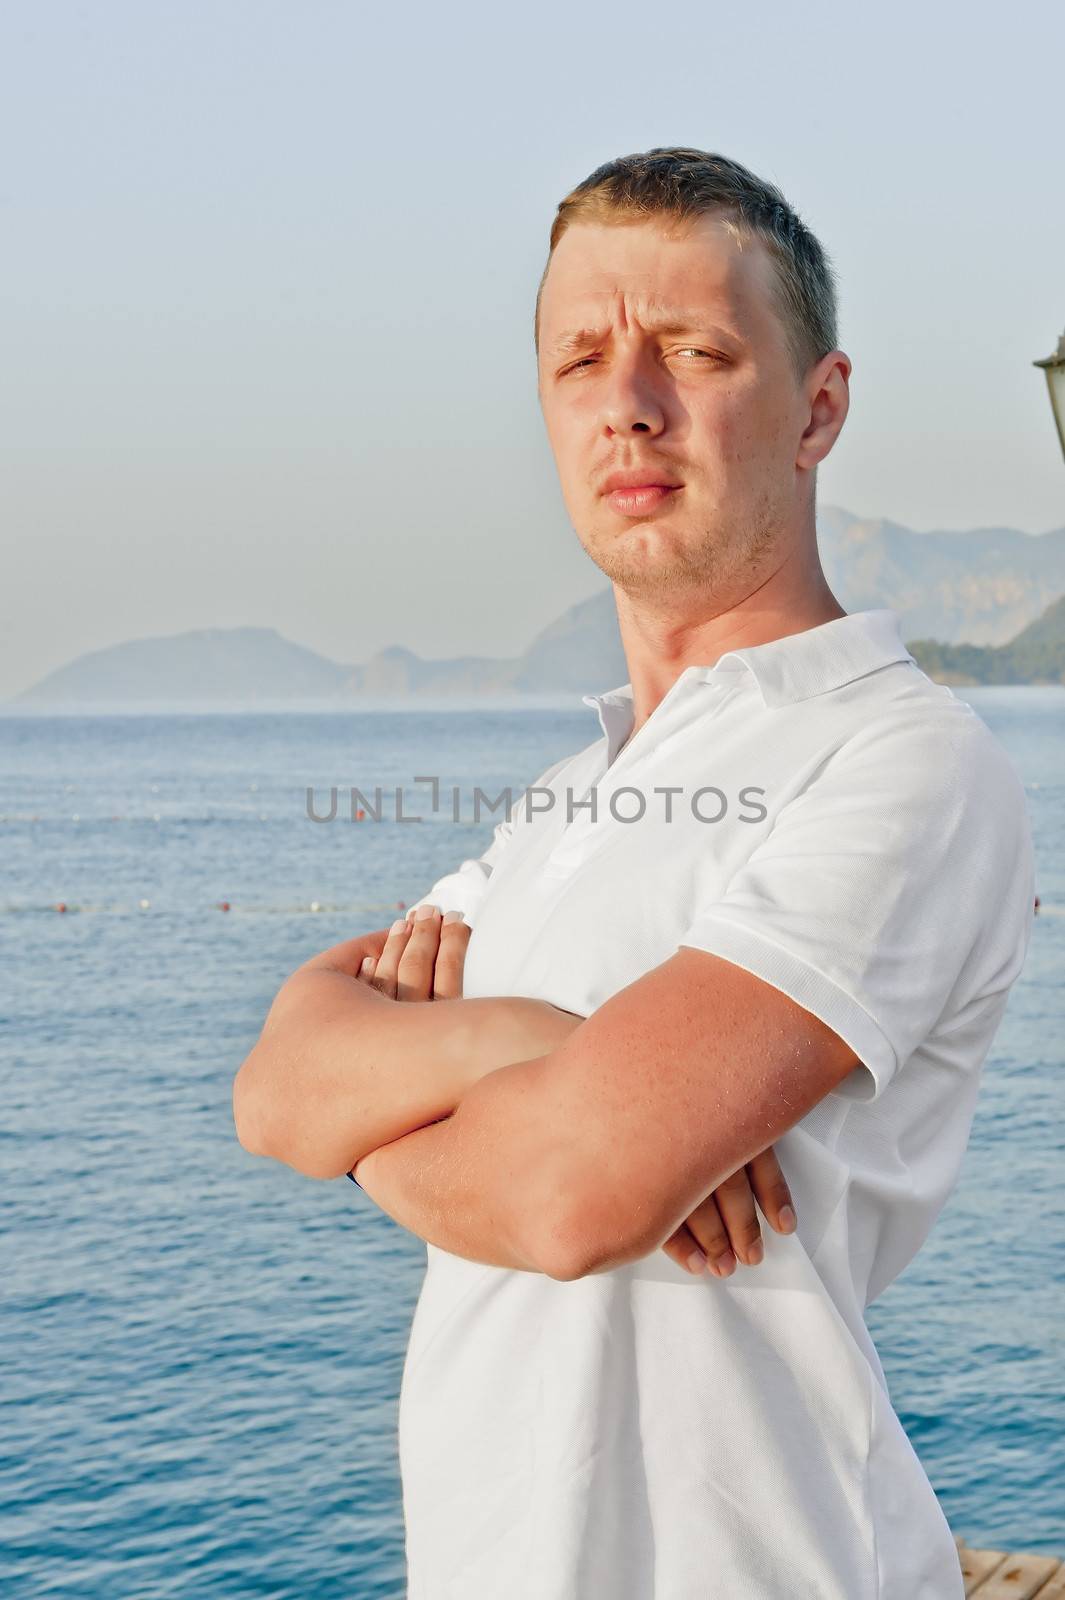 a man with a serious expression on his face is in a closed position against the sea by kosmsos111